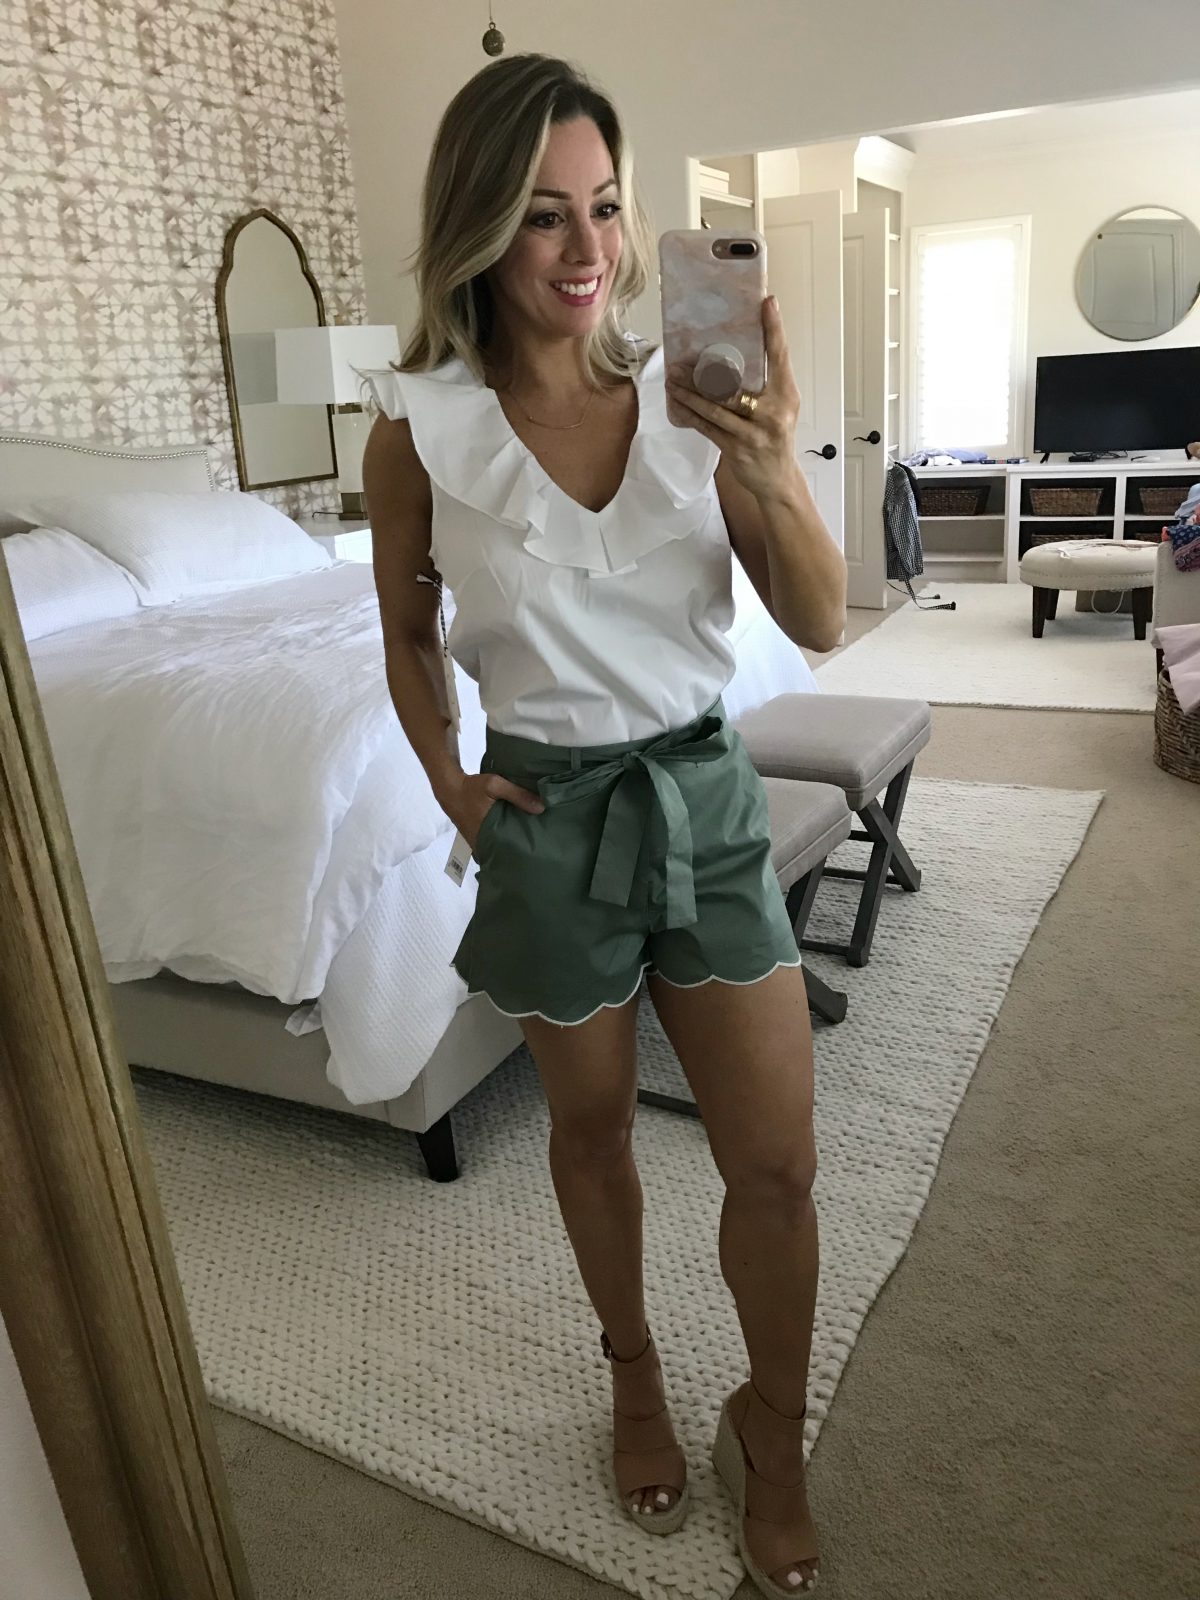 Olive Scallop shorts and white ruffle top